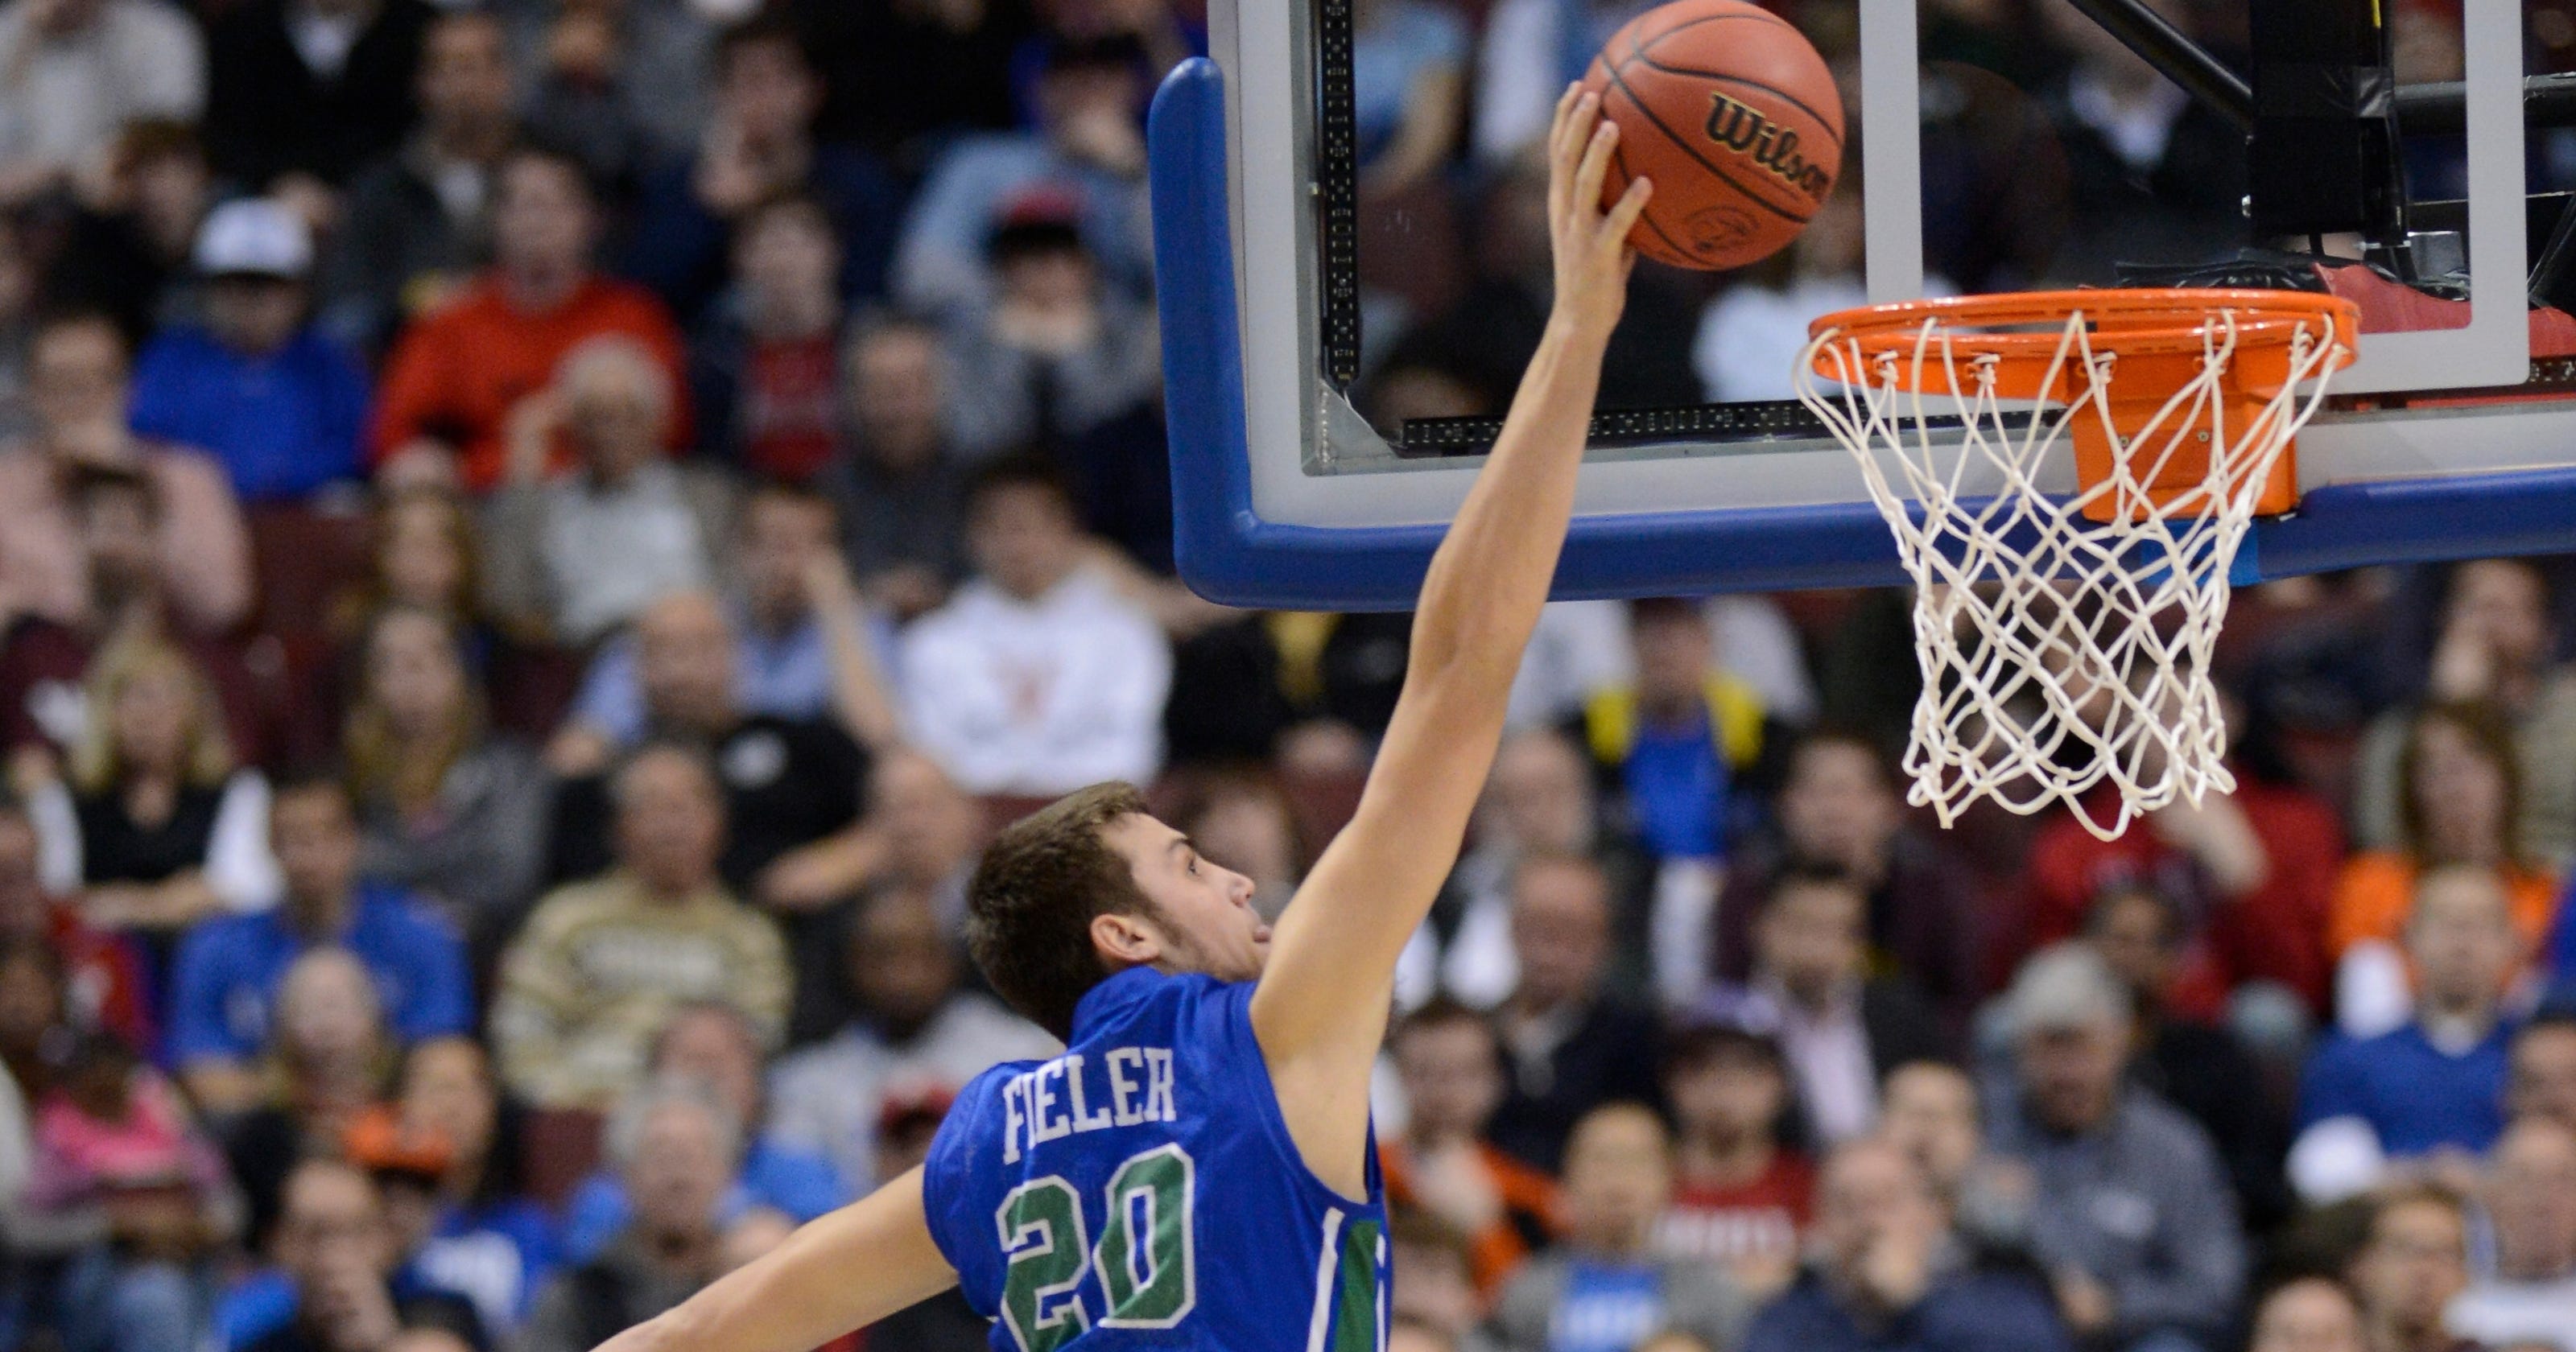 Florida Gulf Coast dunked and danced all over San Diego State